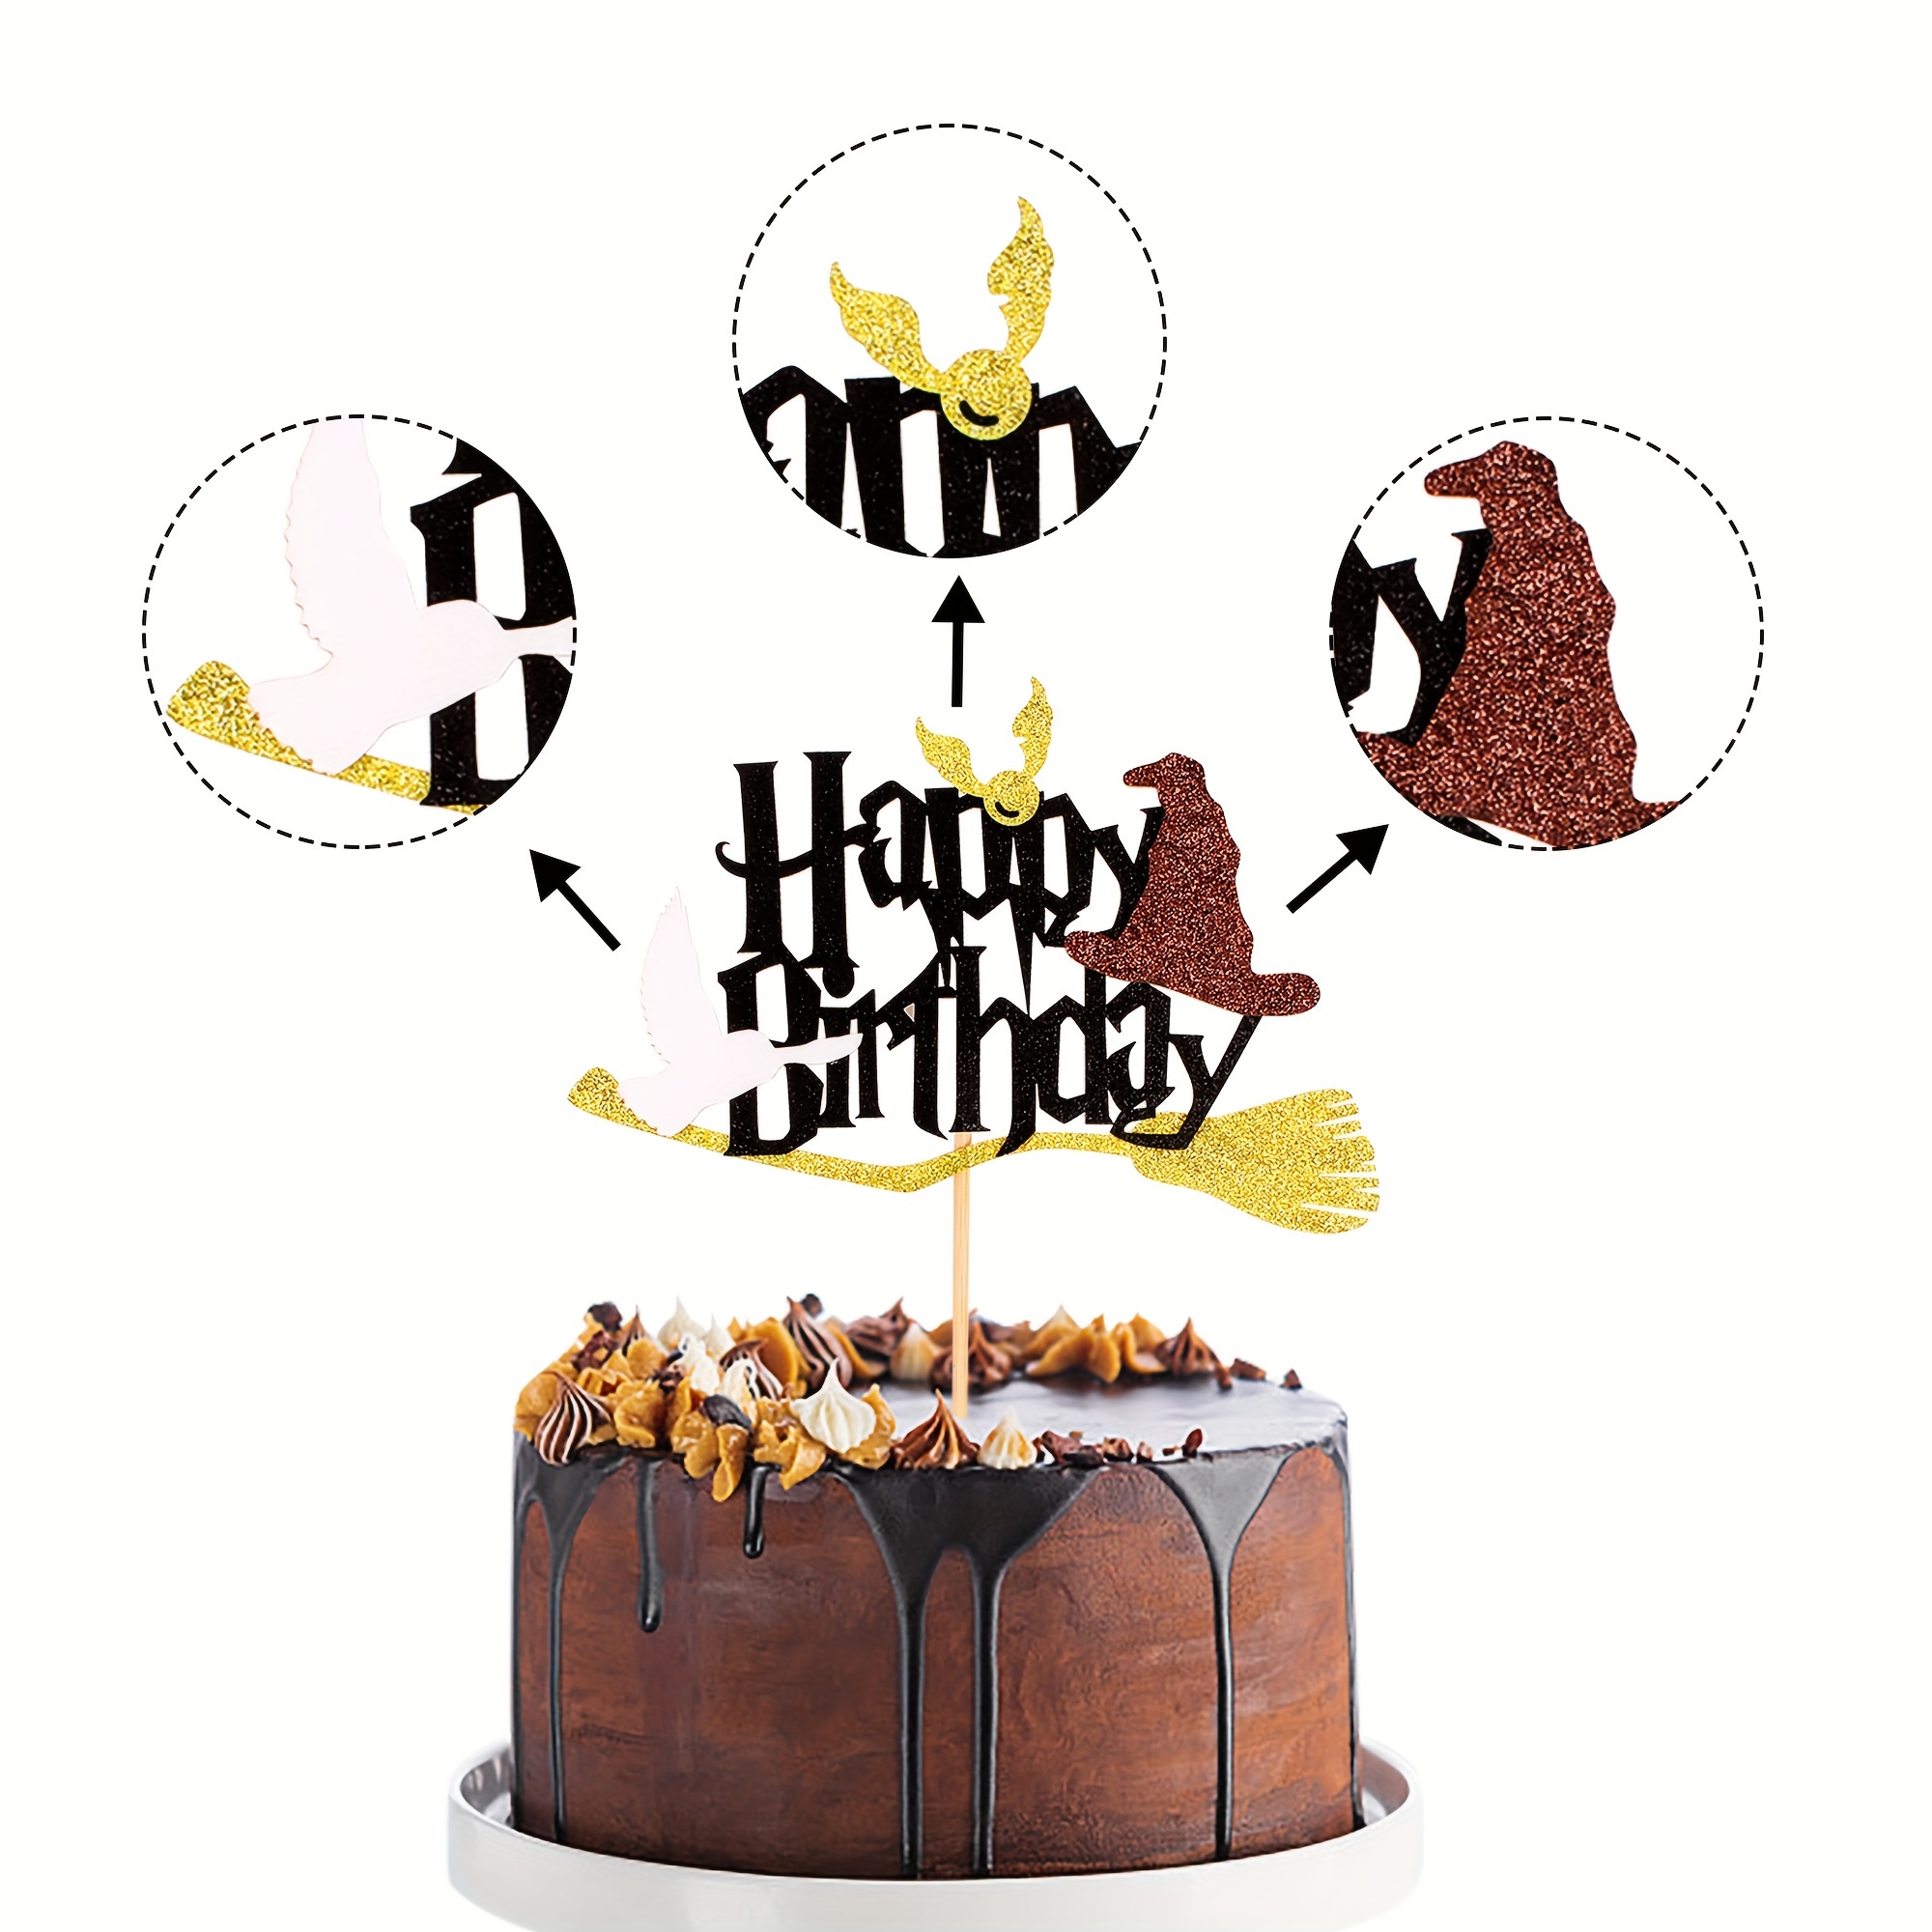 Harry Potter birthday decoration idea: wizard and magic toppers